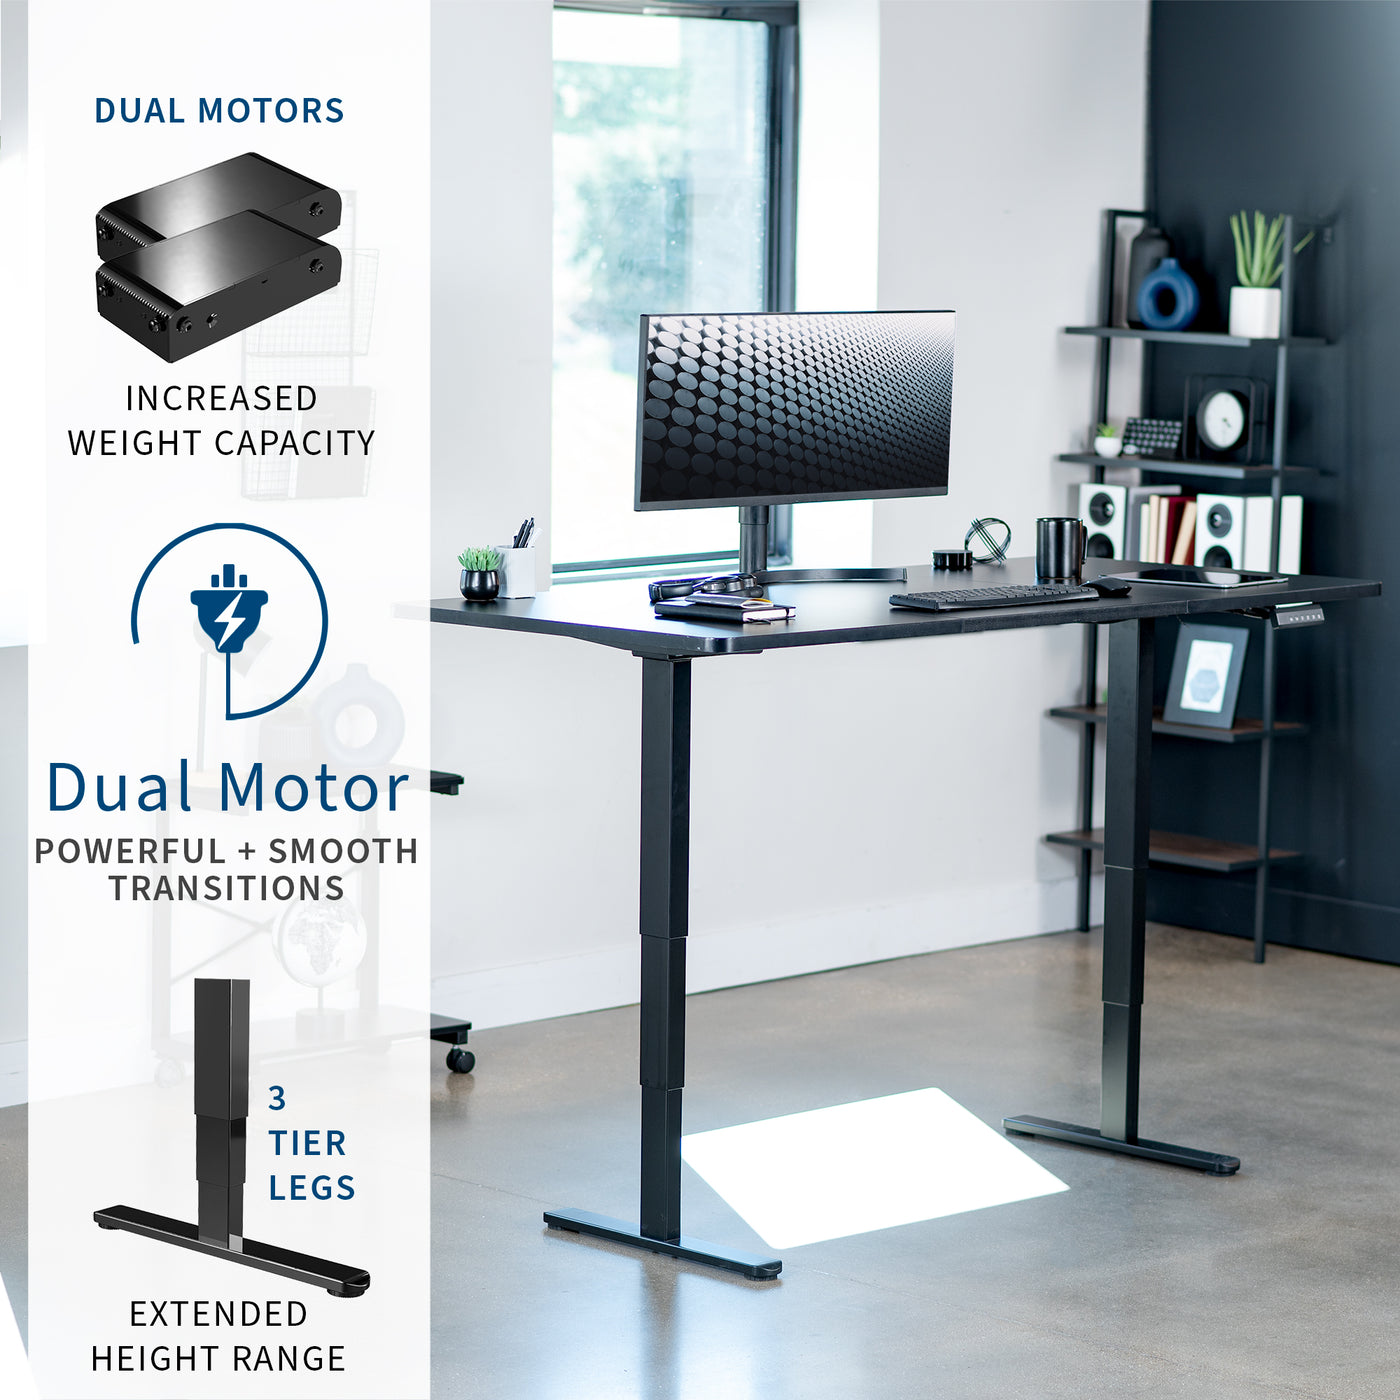 71" x 36" Electric Desk provides a convenient sit and stand workstation for the home or office with quiet dual motor.